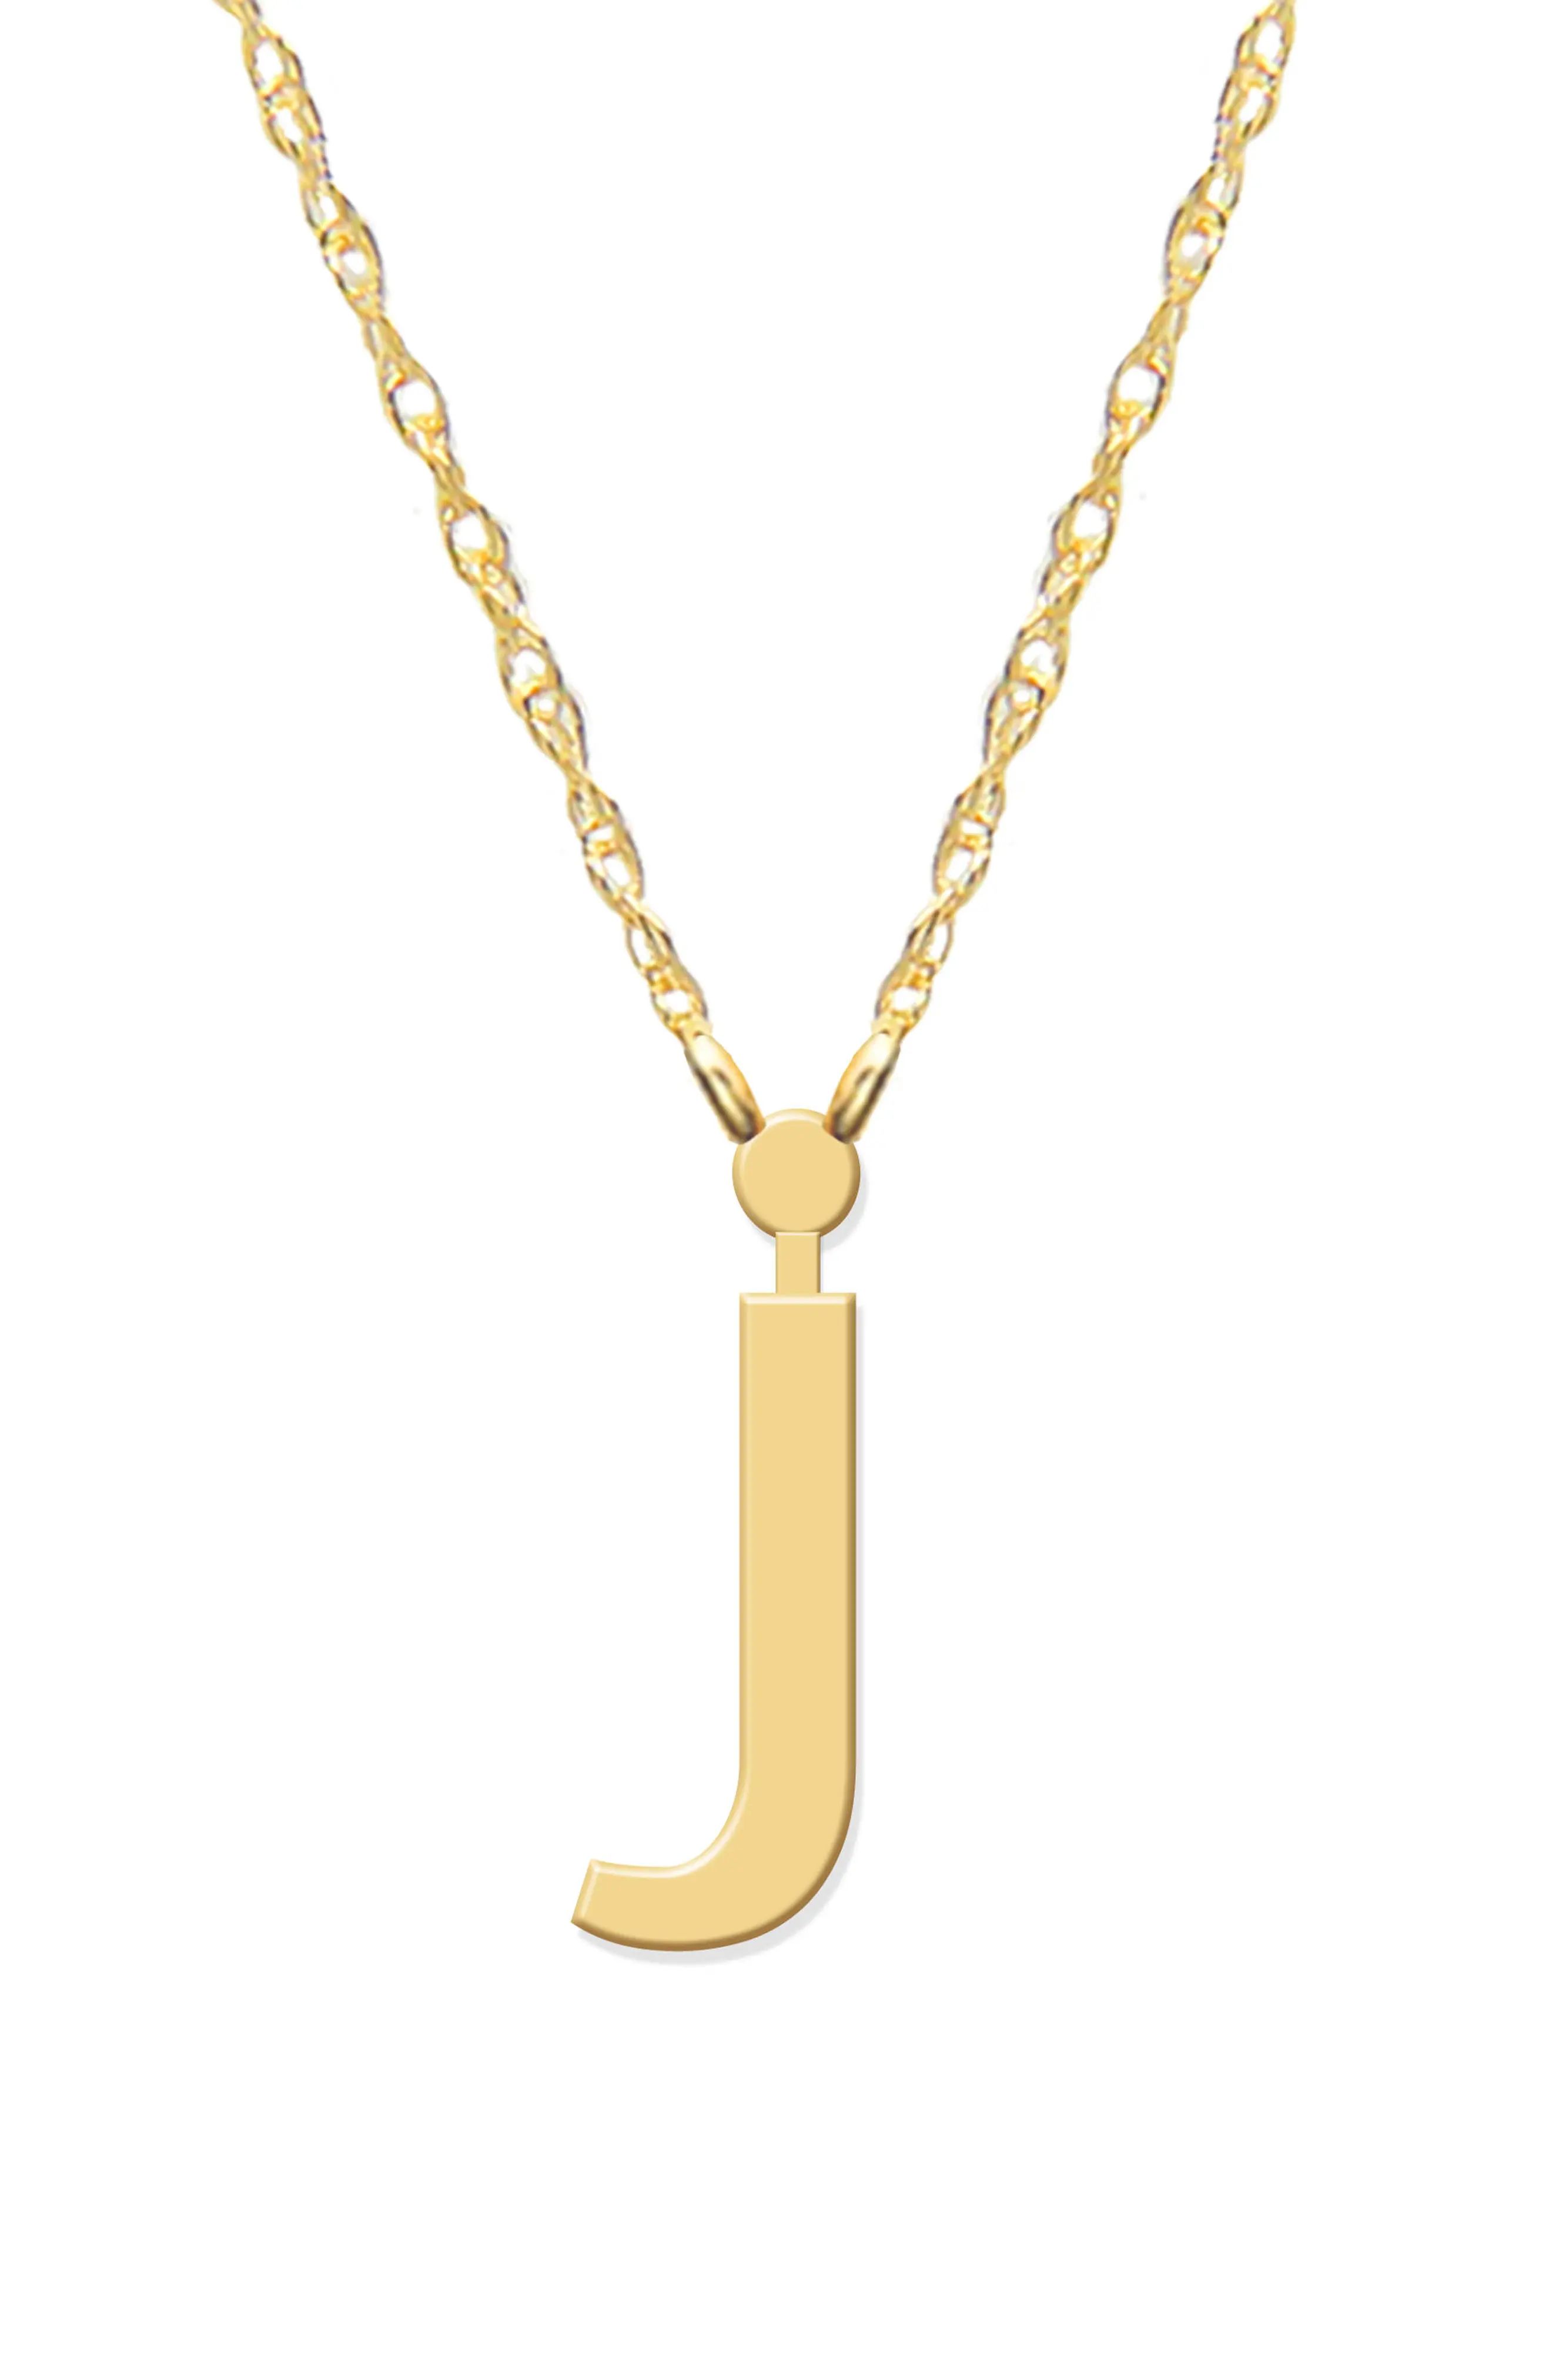 Jane Basch Designs Lowercase Initial Pendant Necklace, Size 18 In in Gold- J at Nordstrom | Nordstrom